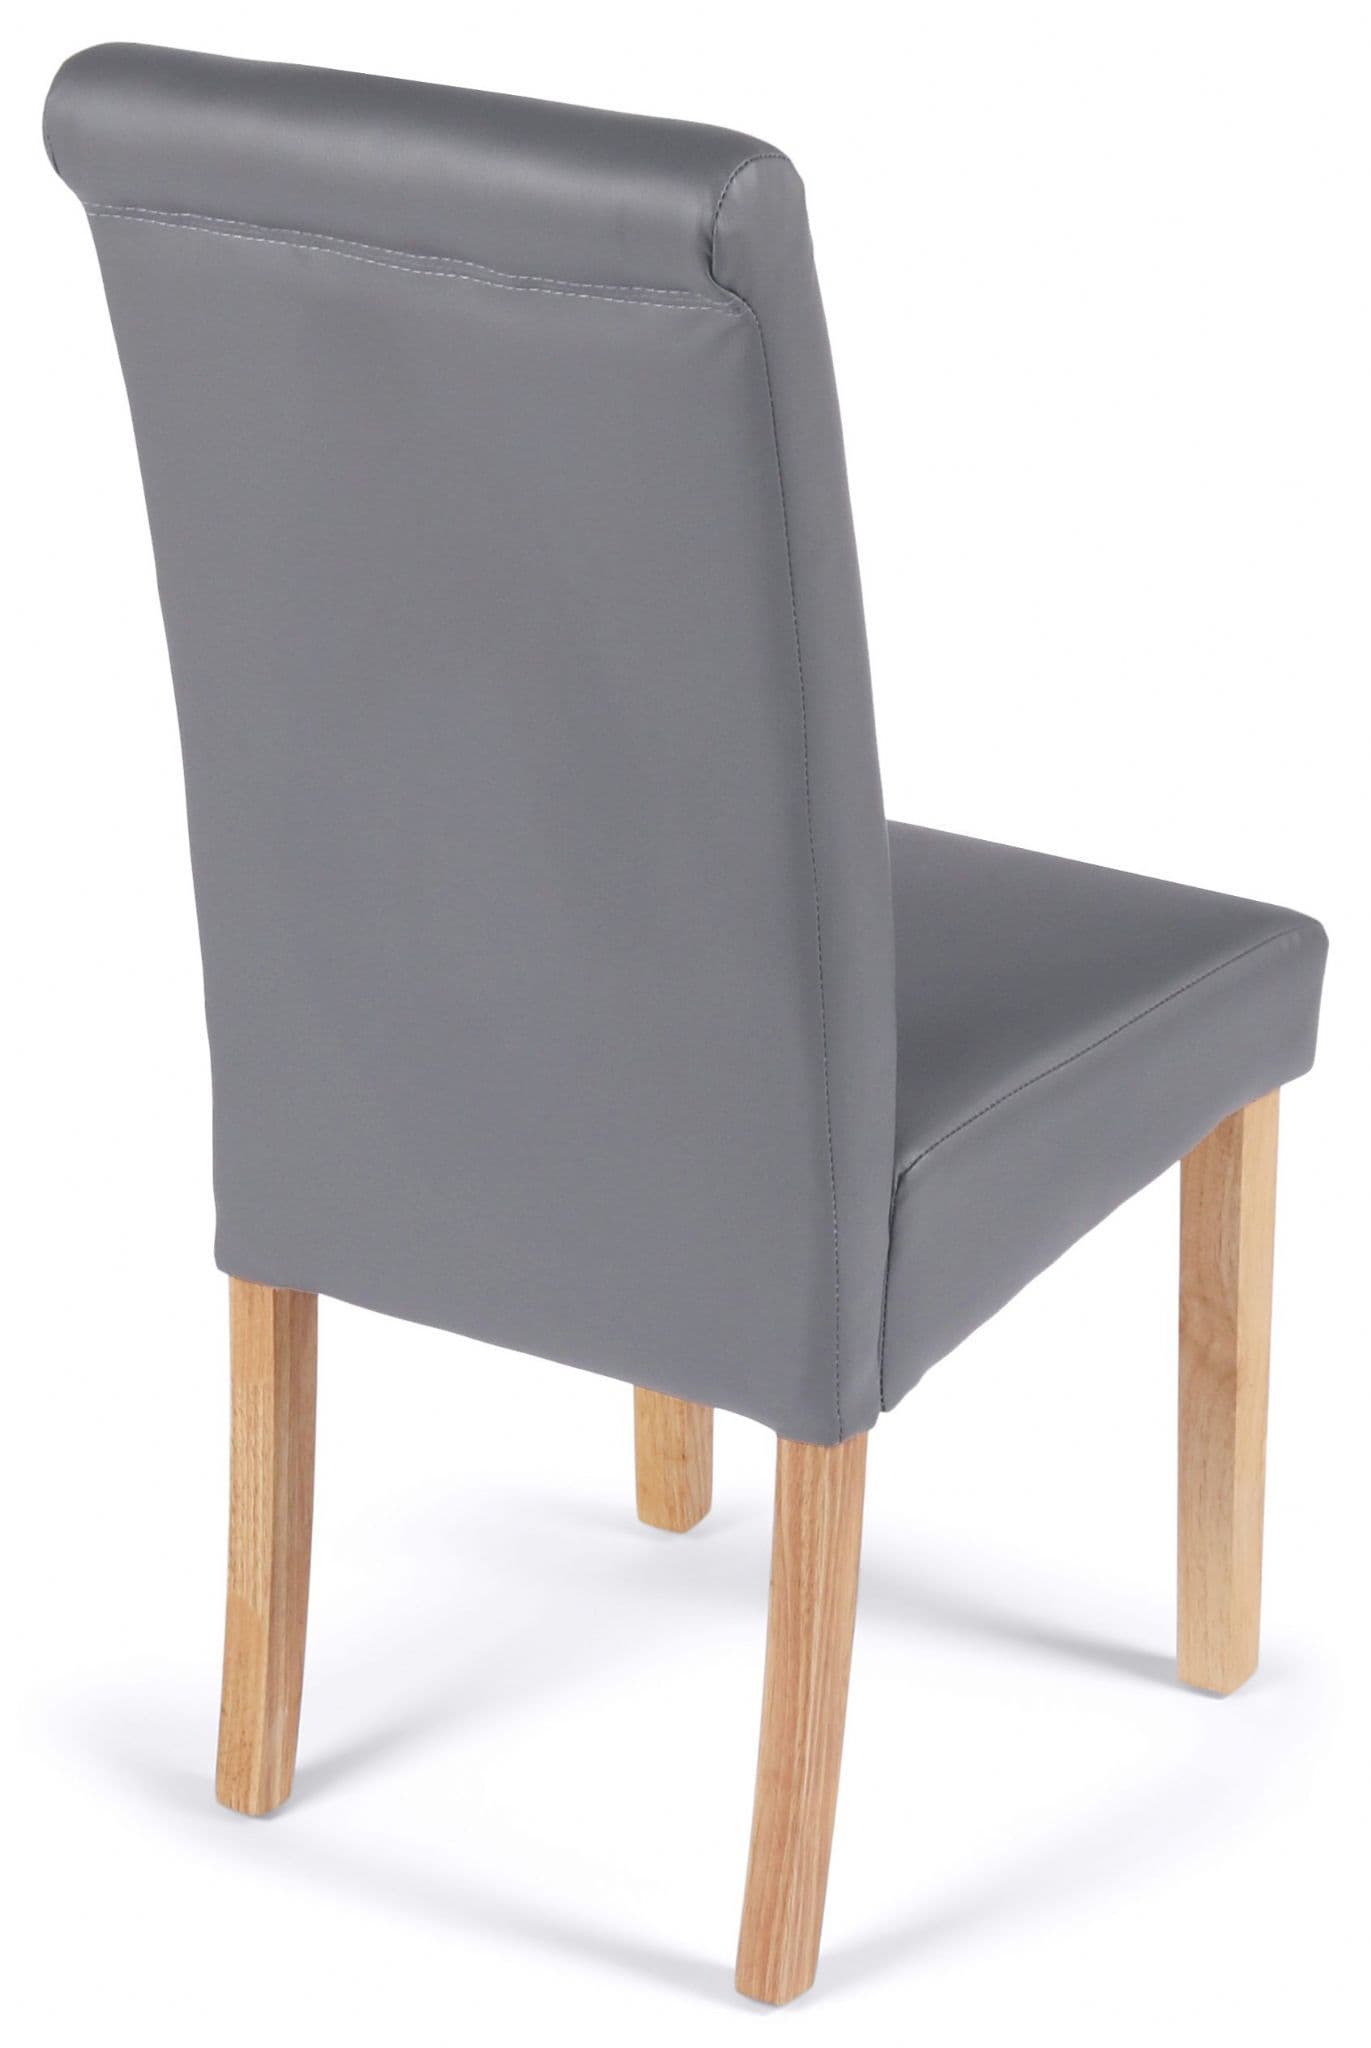 York Grey Faux Leather Chairs with Oak Legs 1/2 Price Deal Rear View